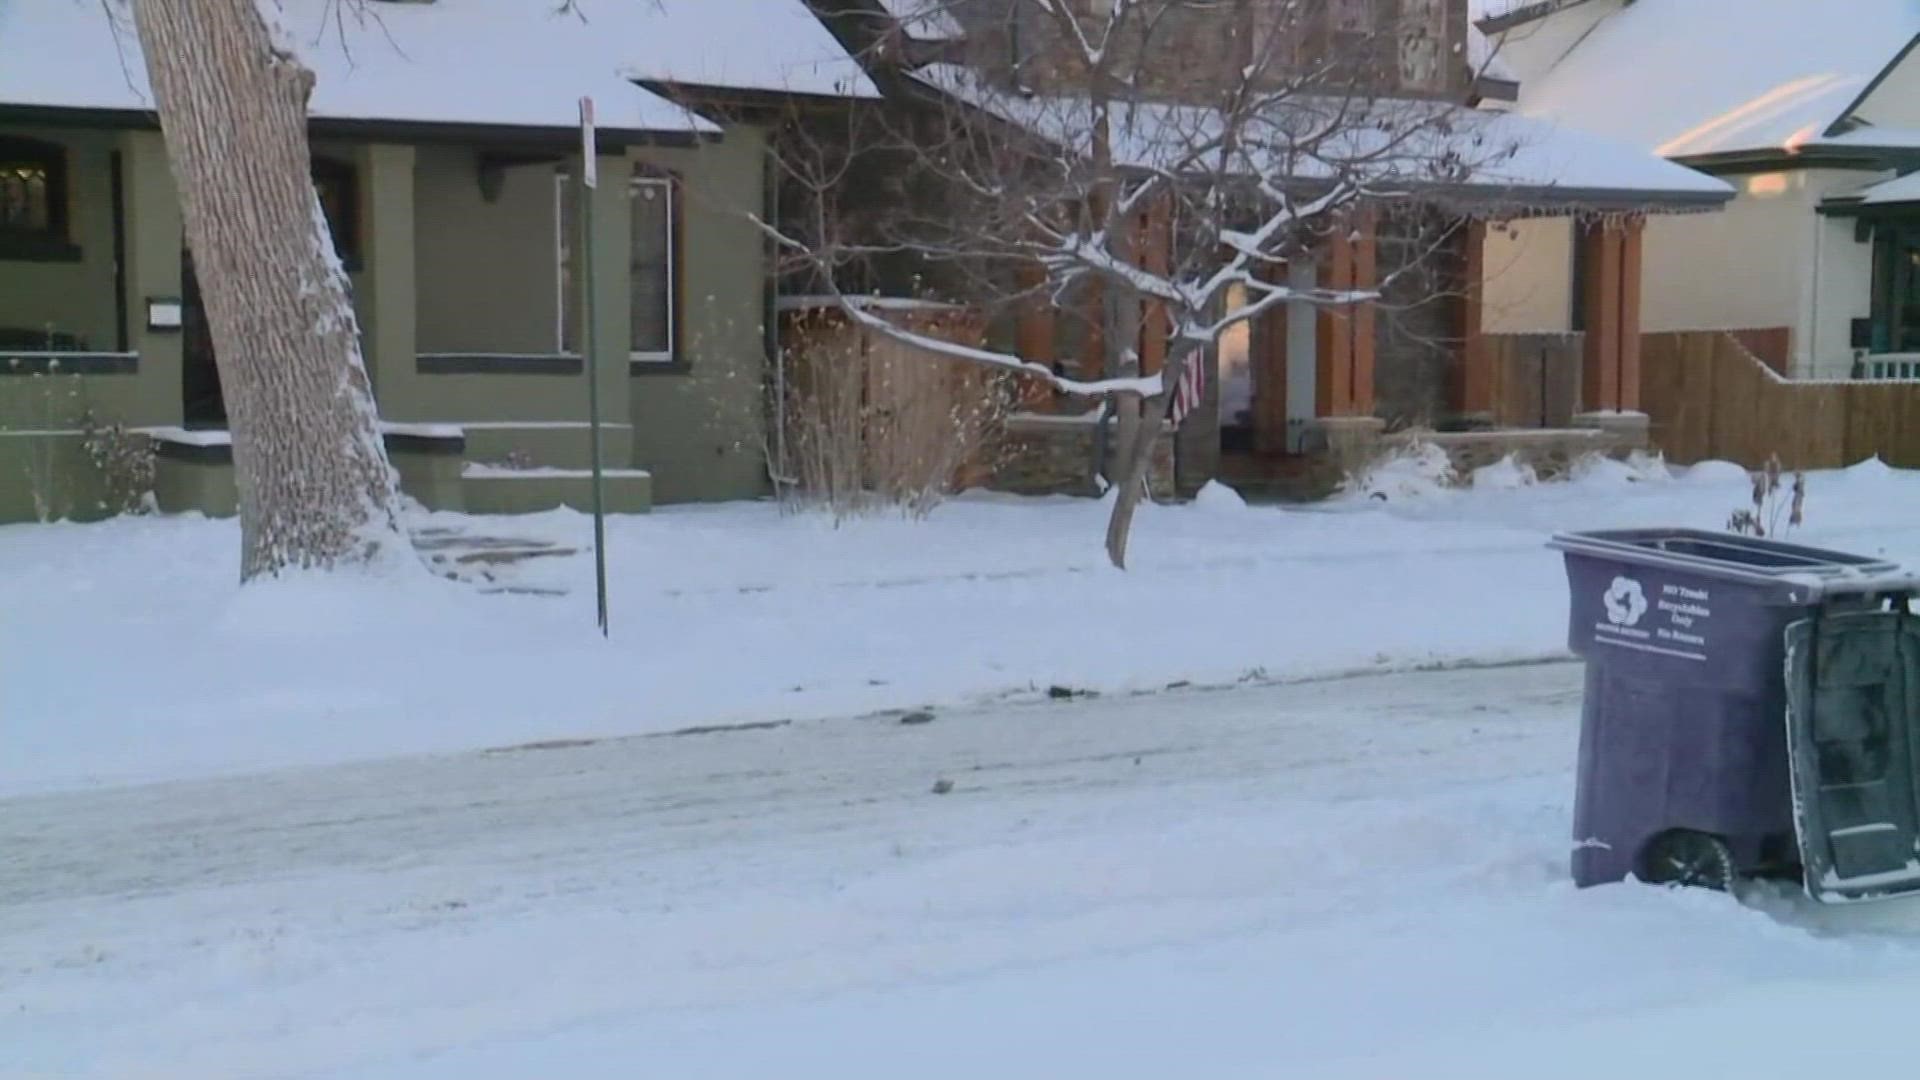 Jaleesa Irizarry takes a look at snowy and slick conditions along Denver side streets on Thursday morning.